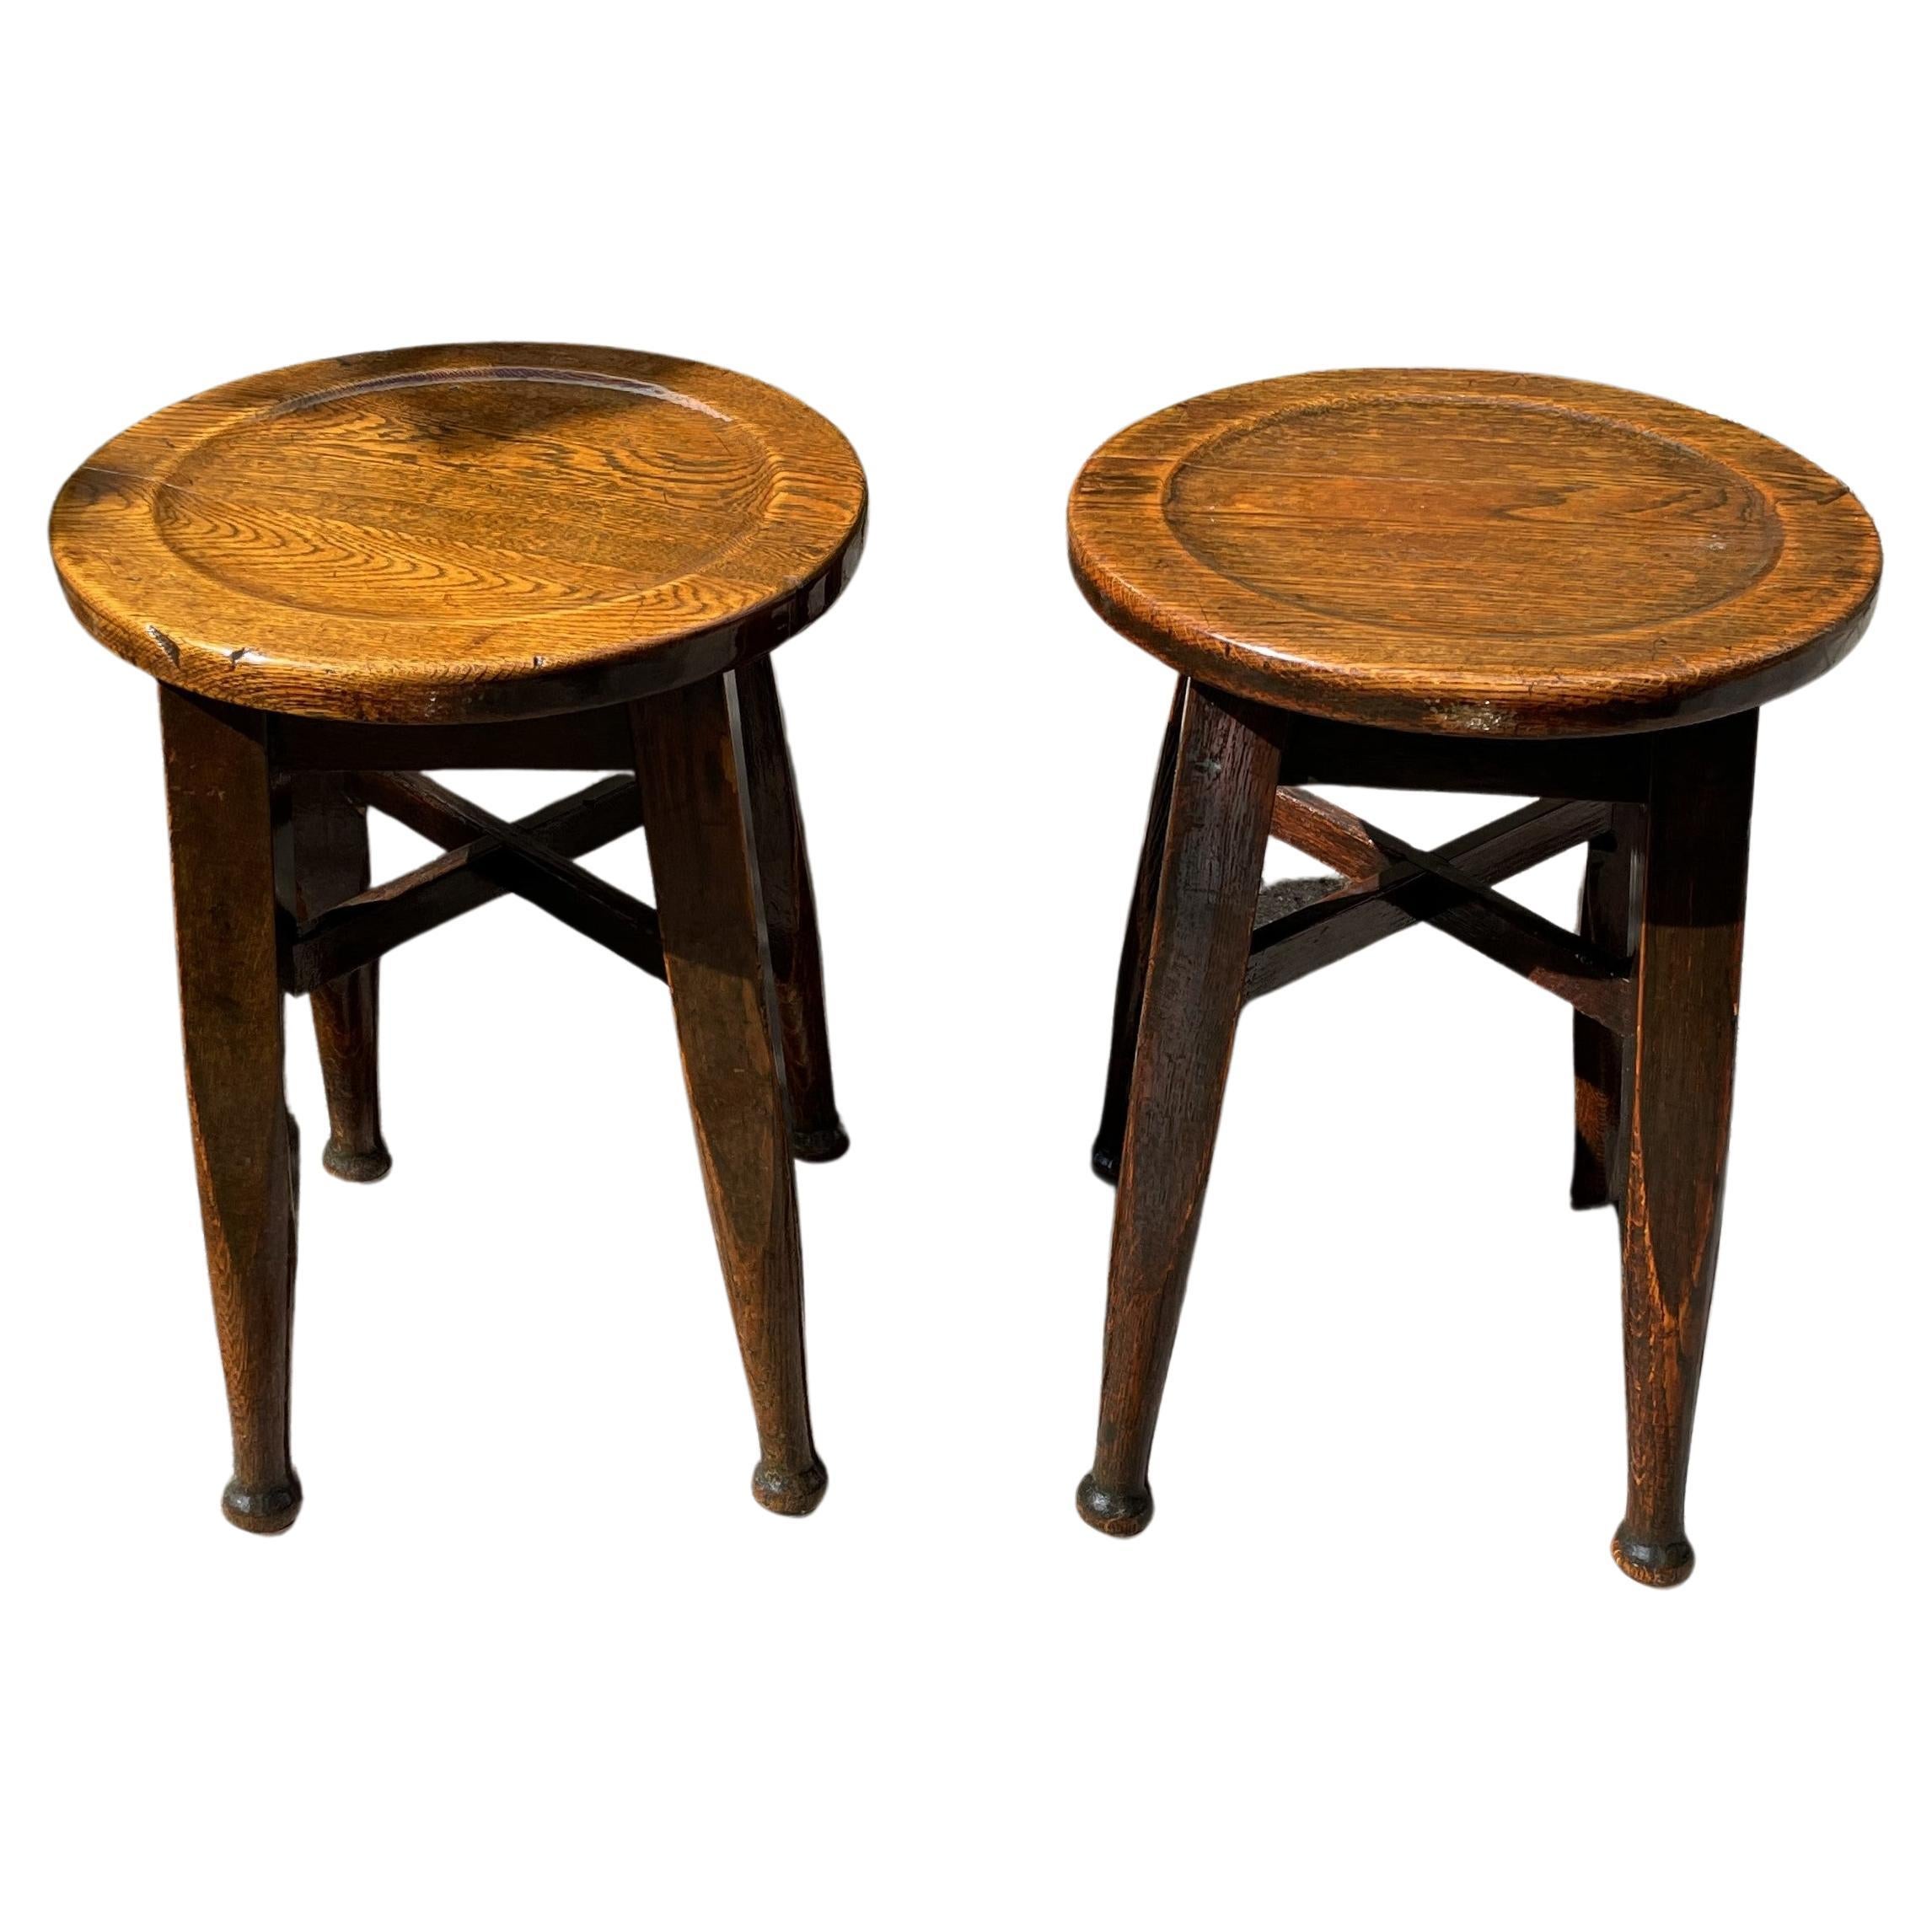 Handmade Antique Pair of Arts and Crafts Style Oak Stools by Gaskell & Chambers For Sale